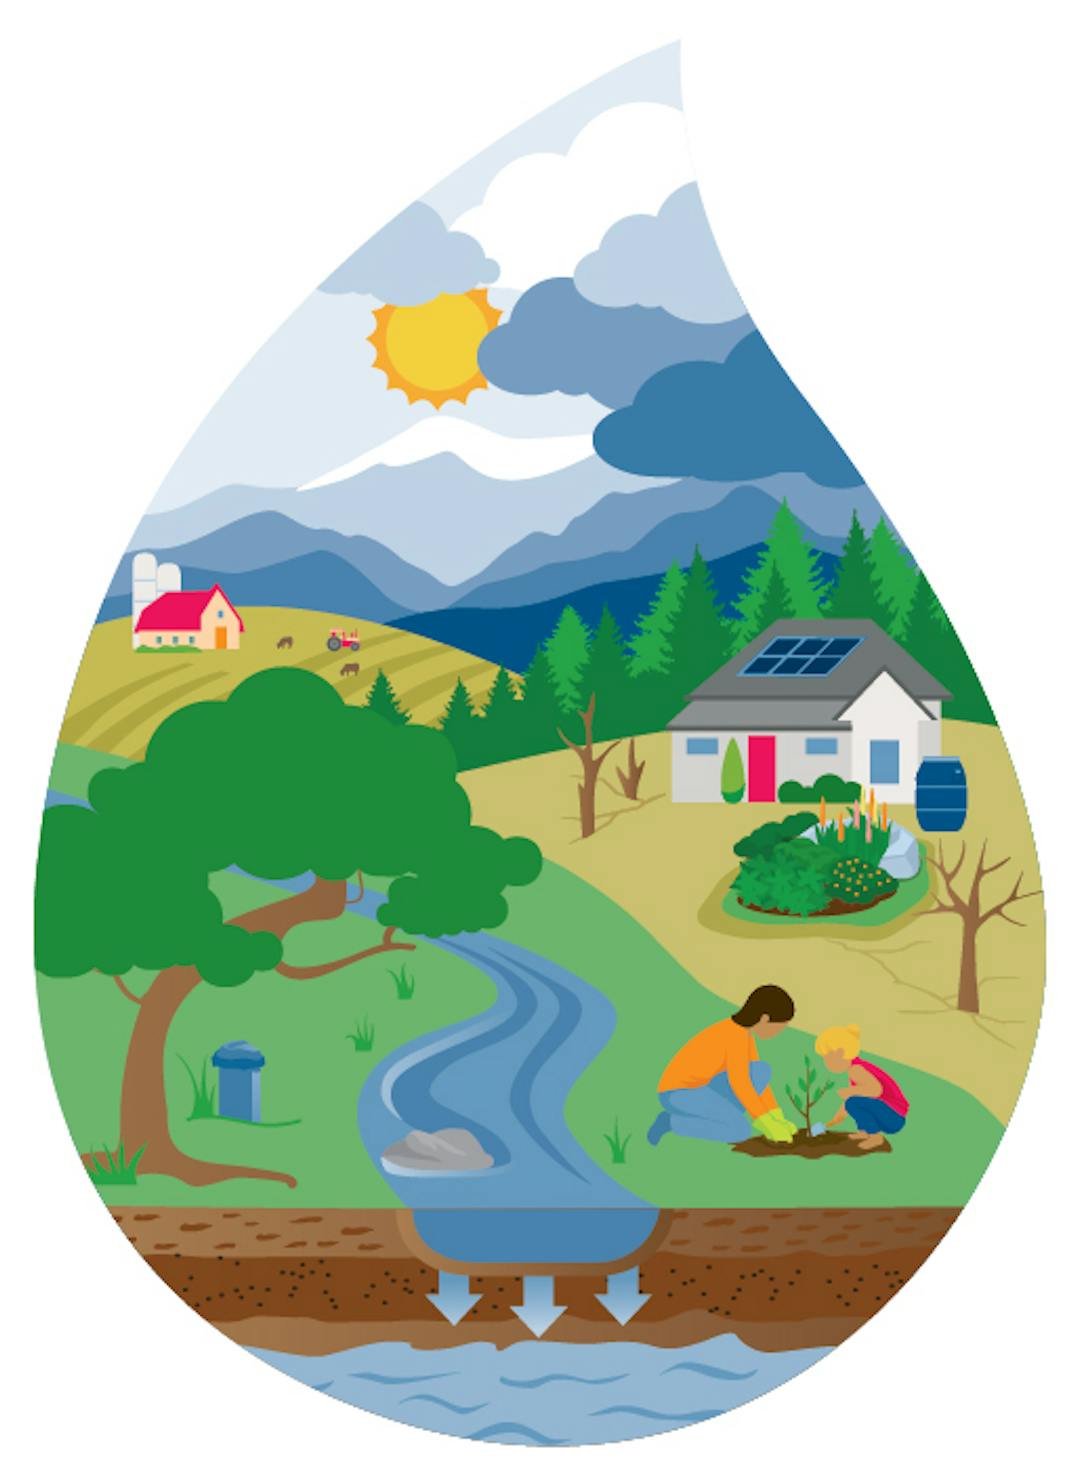 The Regional District of Nanaimo’s Team WaterSmart, in partnership with many great local organizations and municipalities, is excited to host a variety of activities and events to celebrate both World Water Day and Earth Day. Water to Earth Month 2018 will have something for everyone with workshops, stream walks, river rafting, swimming events, educational tours, streamkeepers courses, and movie nights.